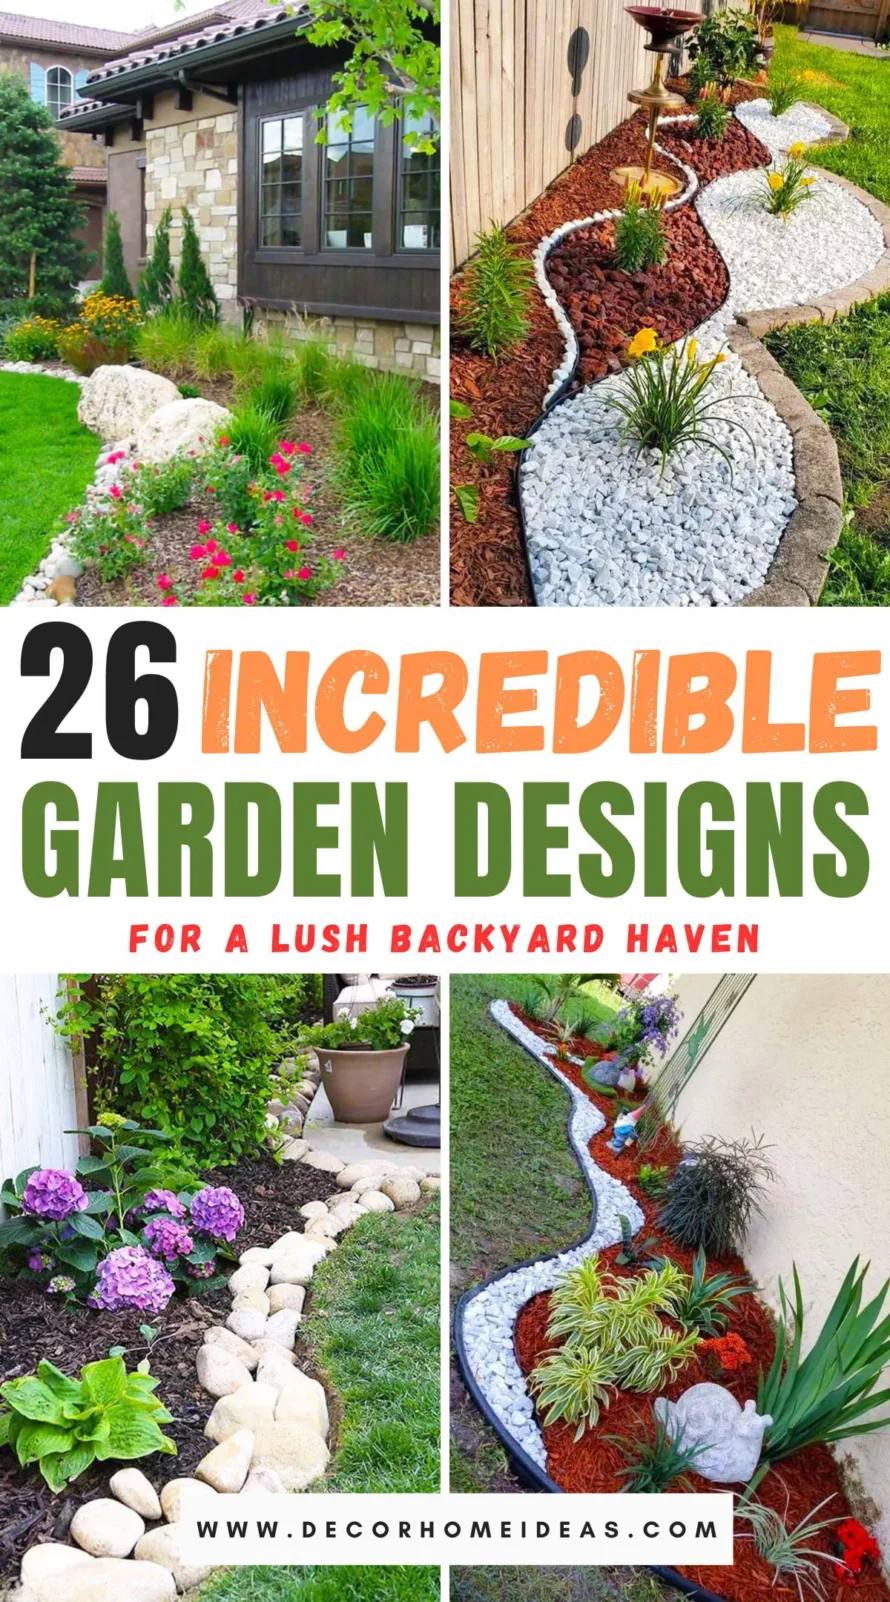 Discover 26 stunning garden designs that transform any home into a breathtaking paradise. From lush vertical gardens to serene water features, find inspiration to create your own outdoor oasis. Dive in to see which idea suits your space!